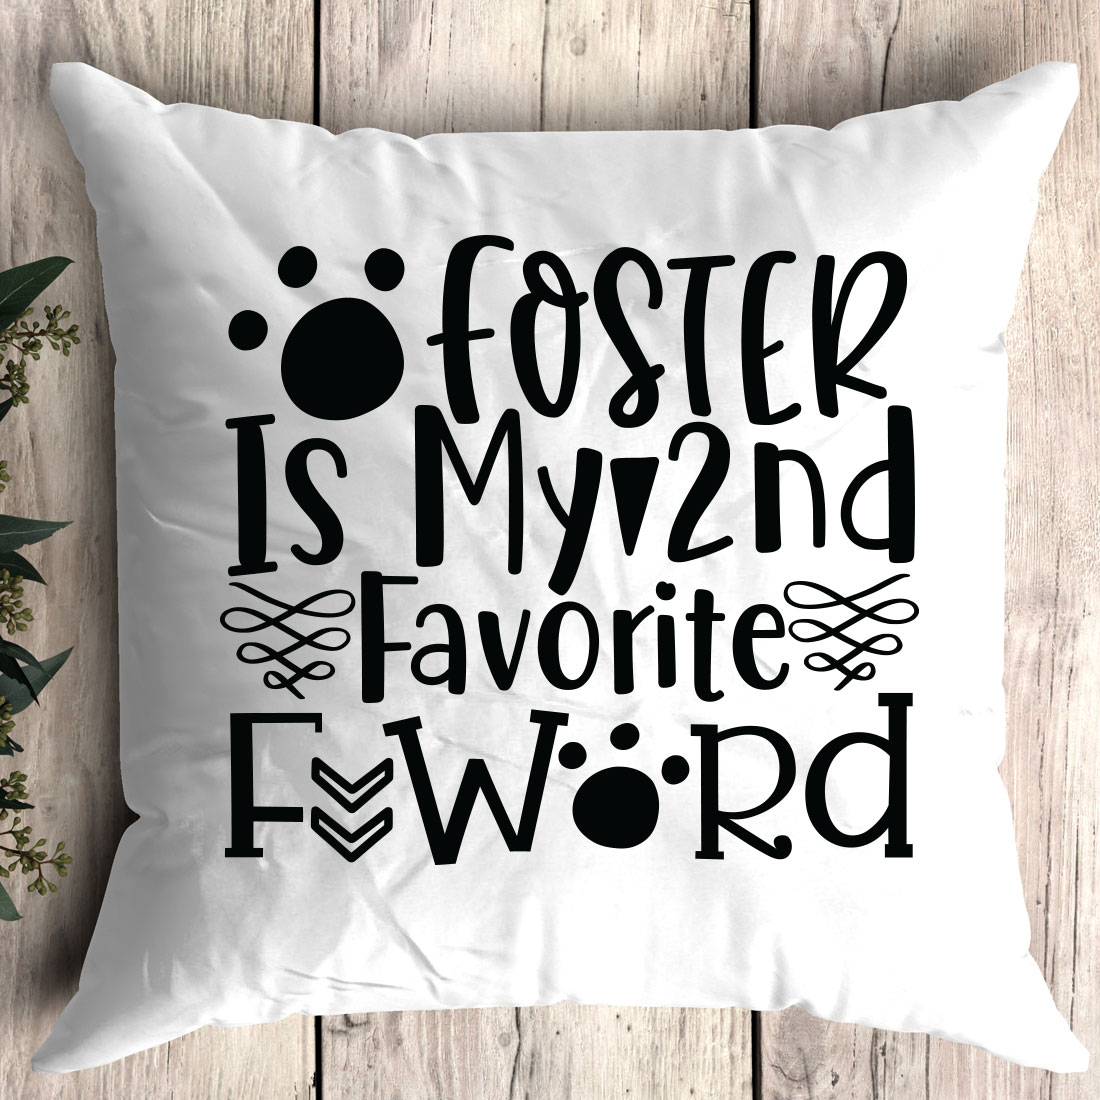 Pillow that says foster is my second favorite word.